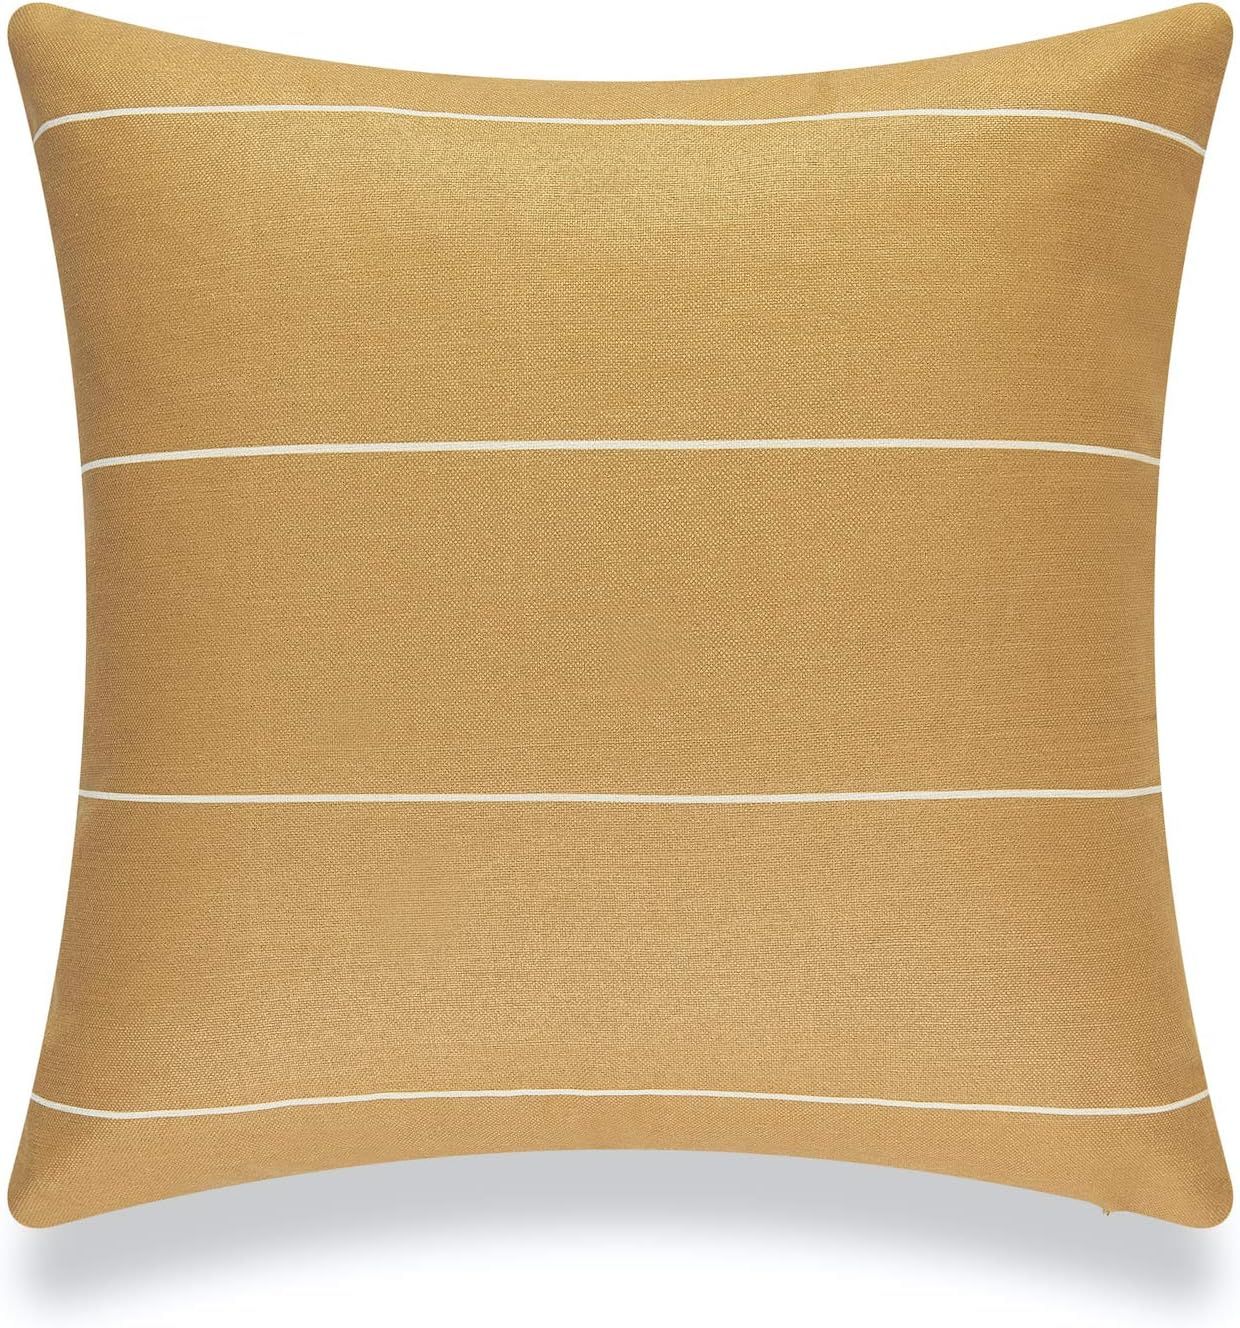 Hofdeco Modern Boho Patio Indoor Outdoor Pillow Cover ONLY for Backyard, Couch, Sofa, Mustard Yel... | Amazon (US)